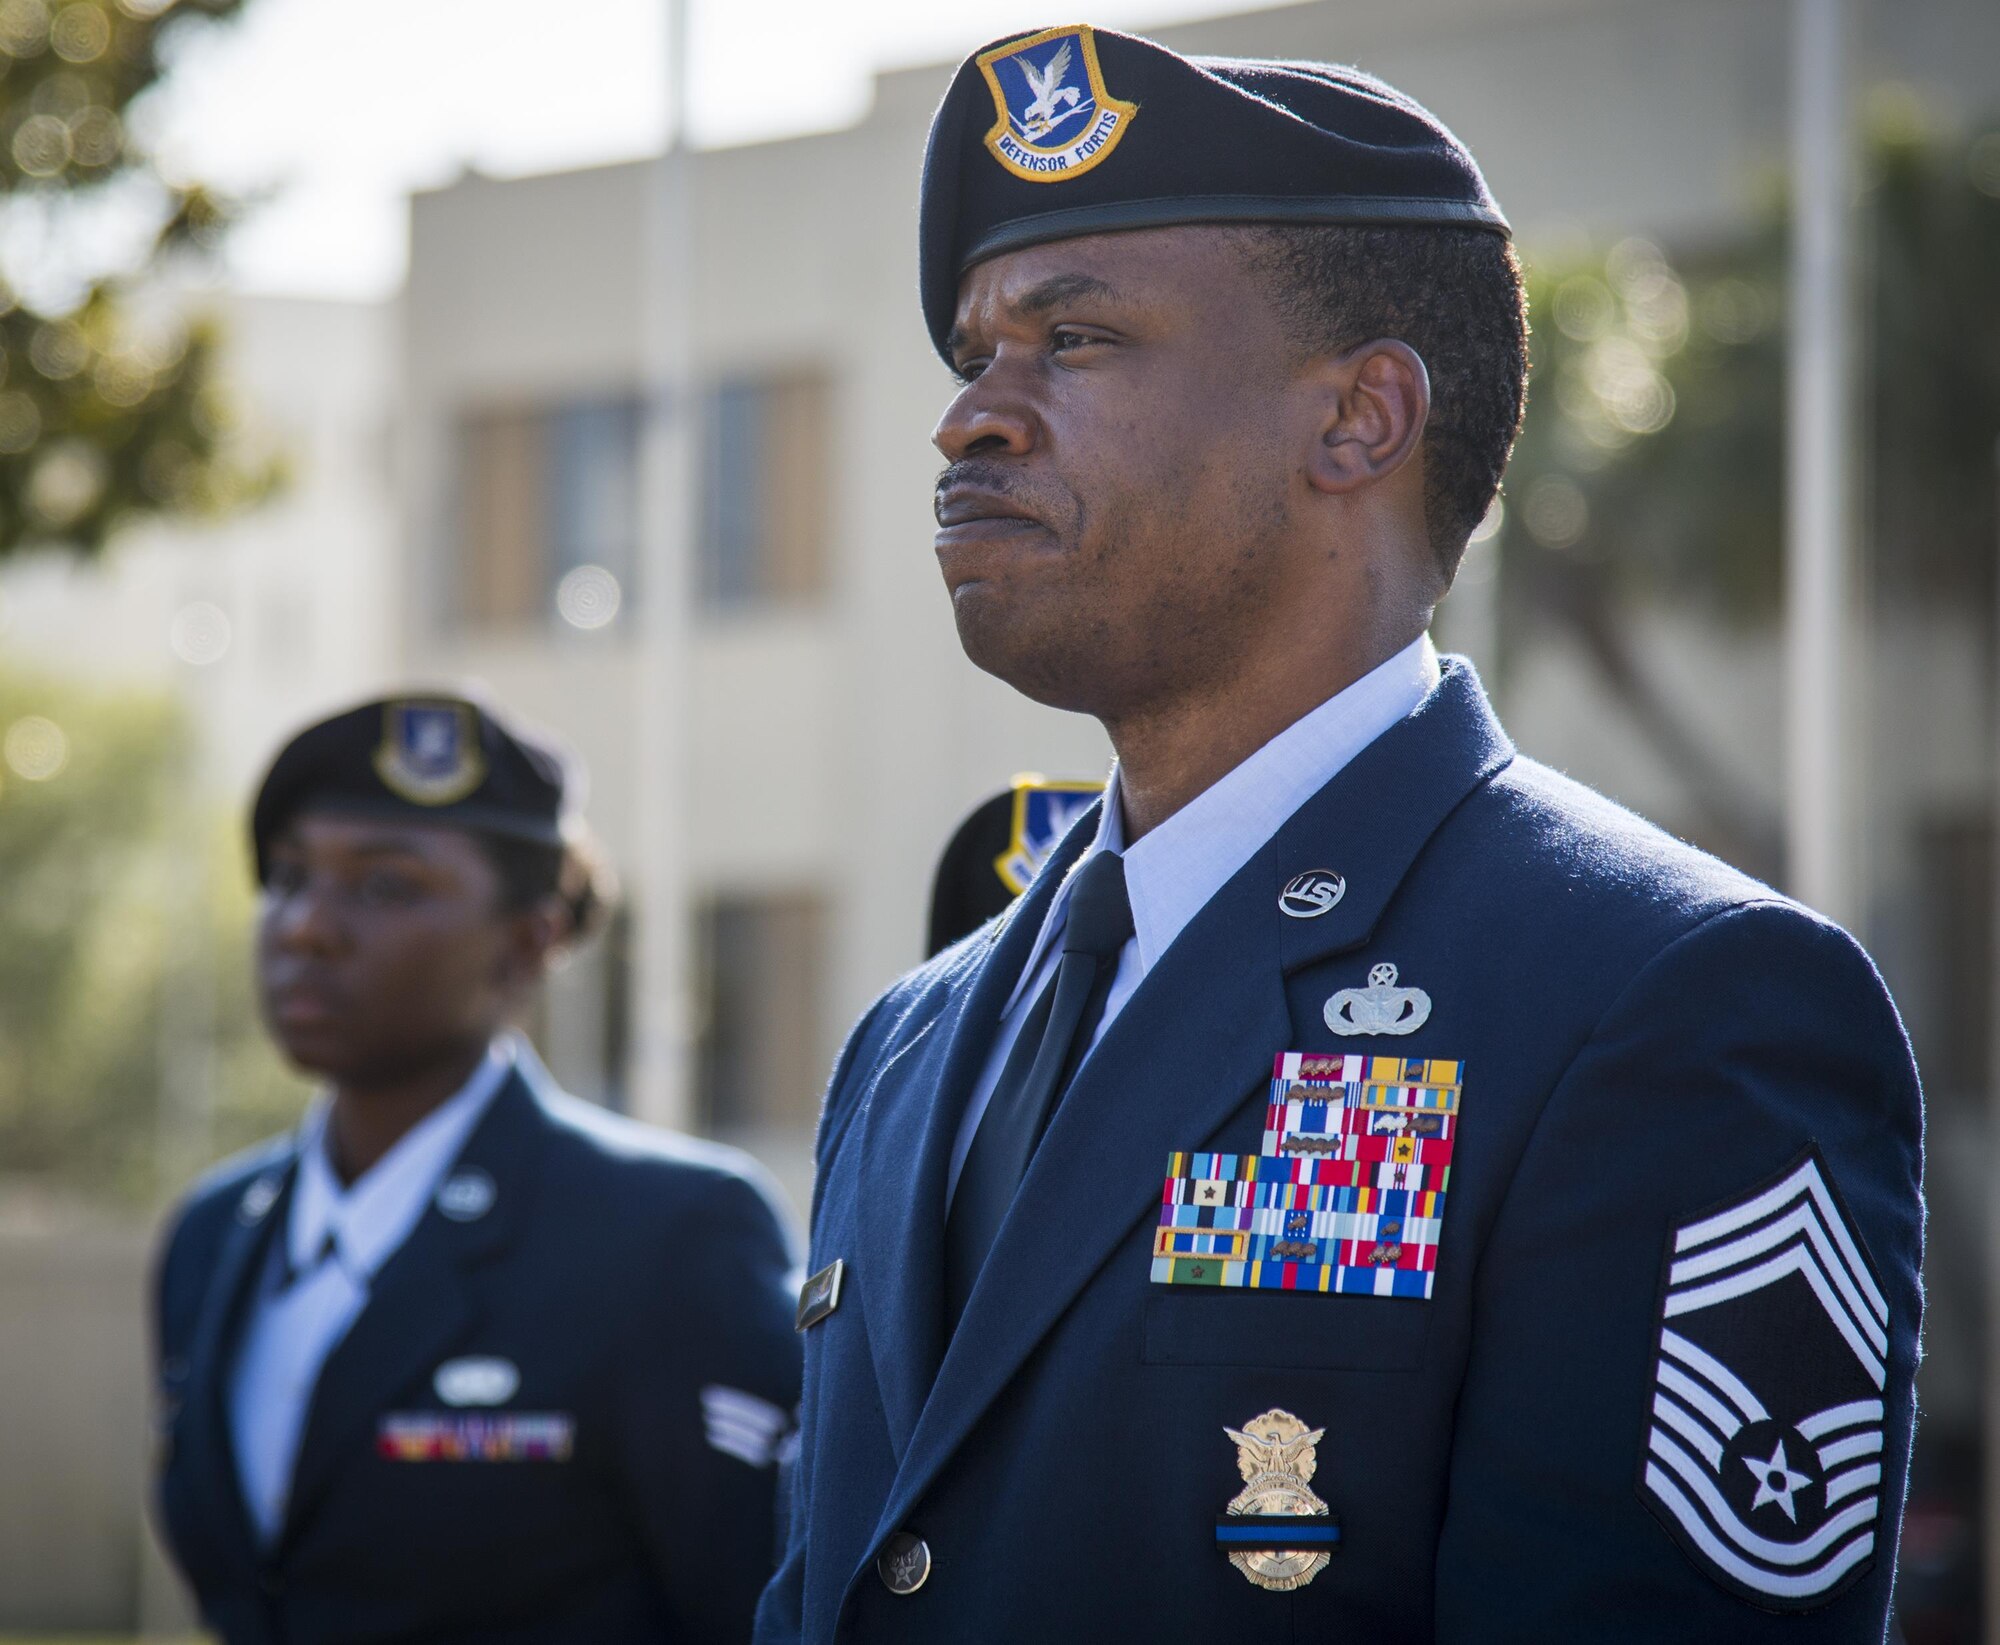 Chief Master Sgt. Mario White, 96th Security Forces Squadron, stands with his Airmen after the base retreat ceremony May 19 at Eglin Air Force Base, Fla.  The retreat ceremony closed out the base’s Police Week activities.  (U.S. Air Force photo/Cheryl Sawyers)